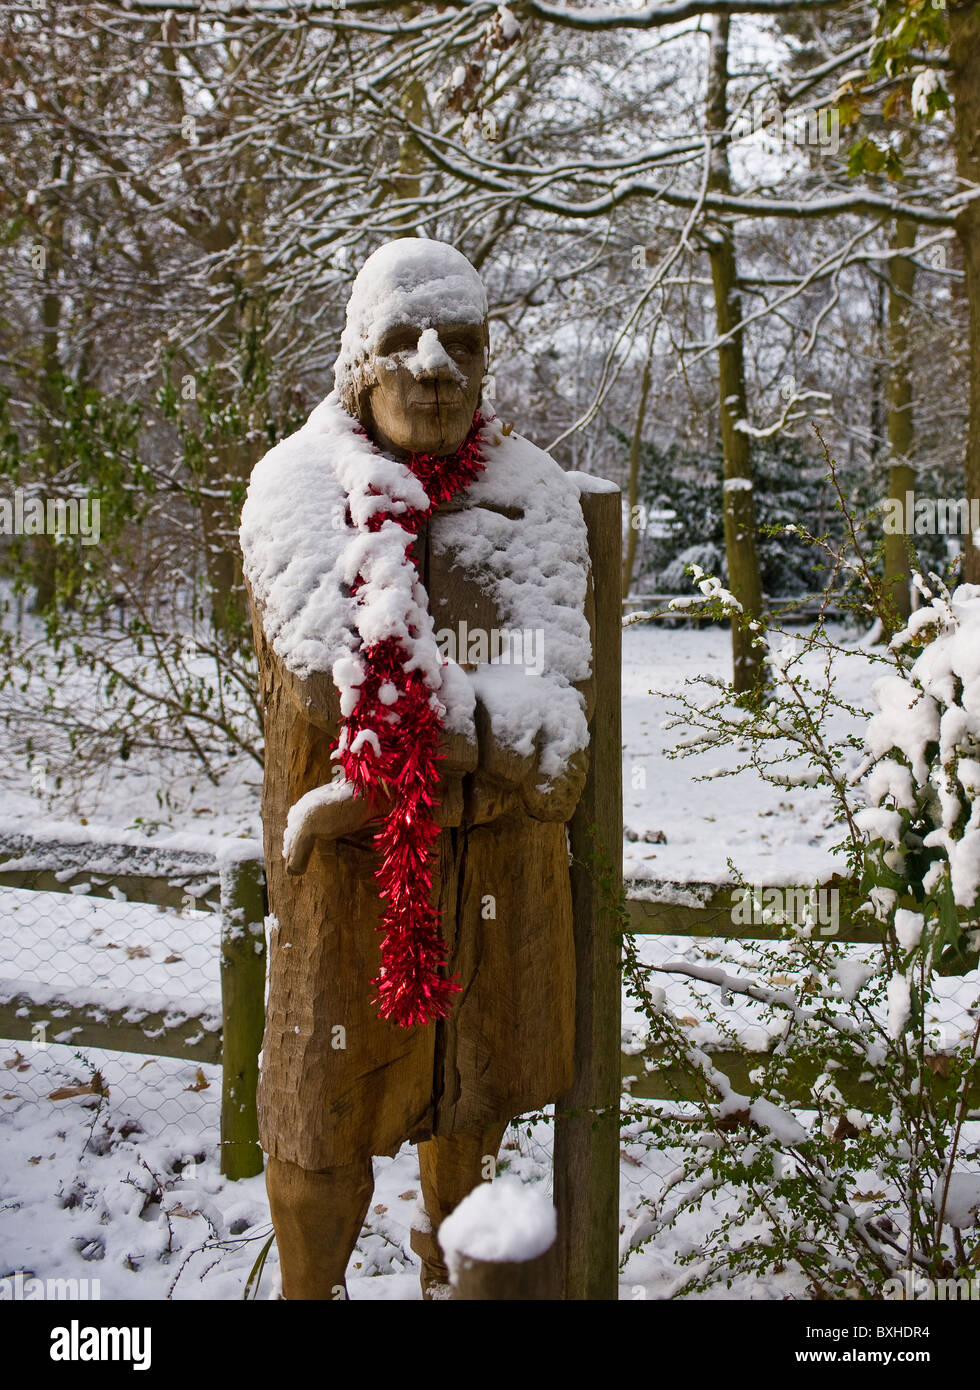 A wooden sculpture covered in snow at Thorndon Park in Essex.  Photograph by Gordon Scammell Stock Photo